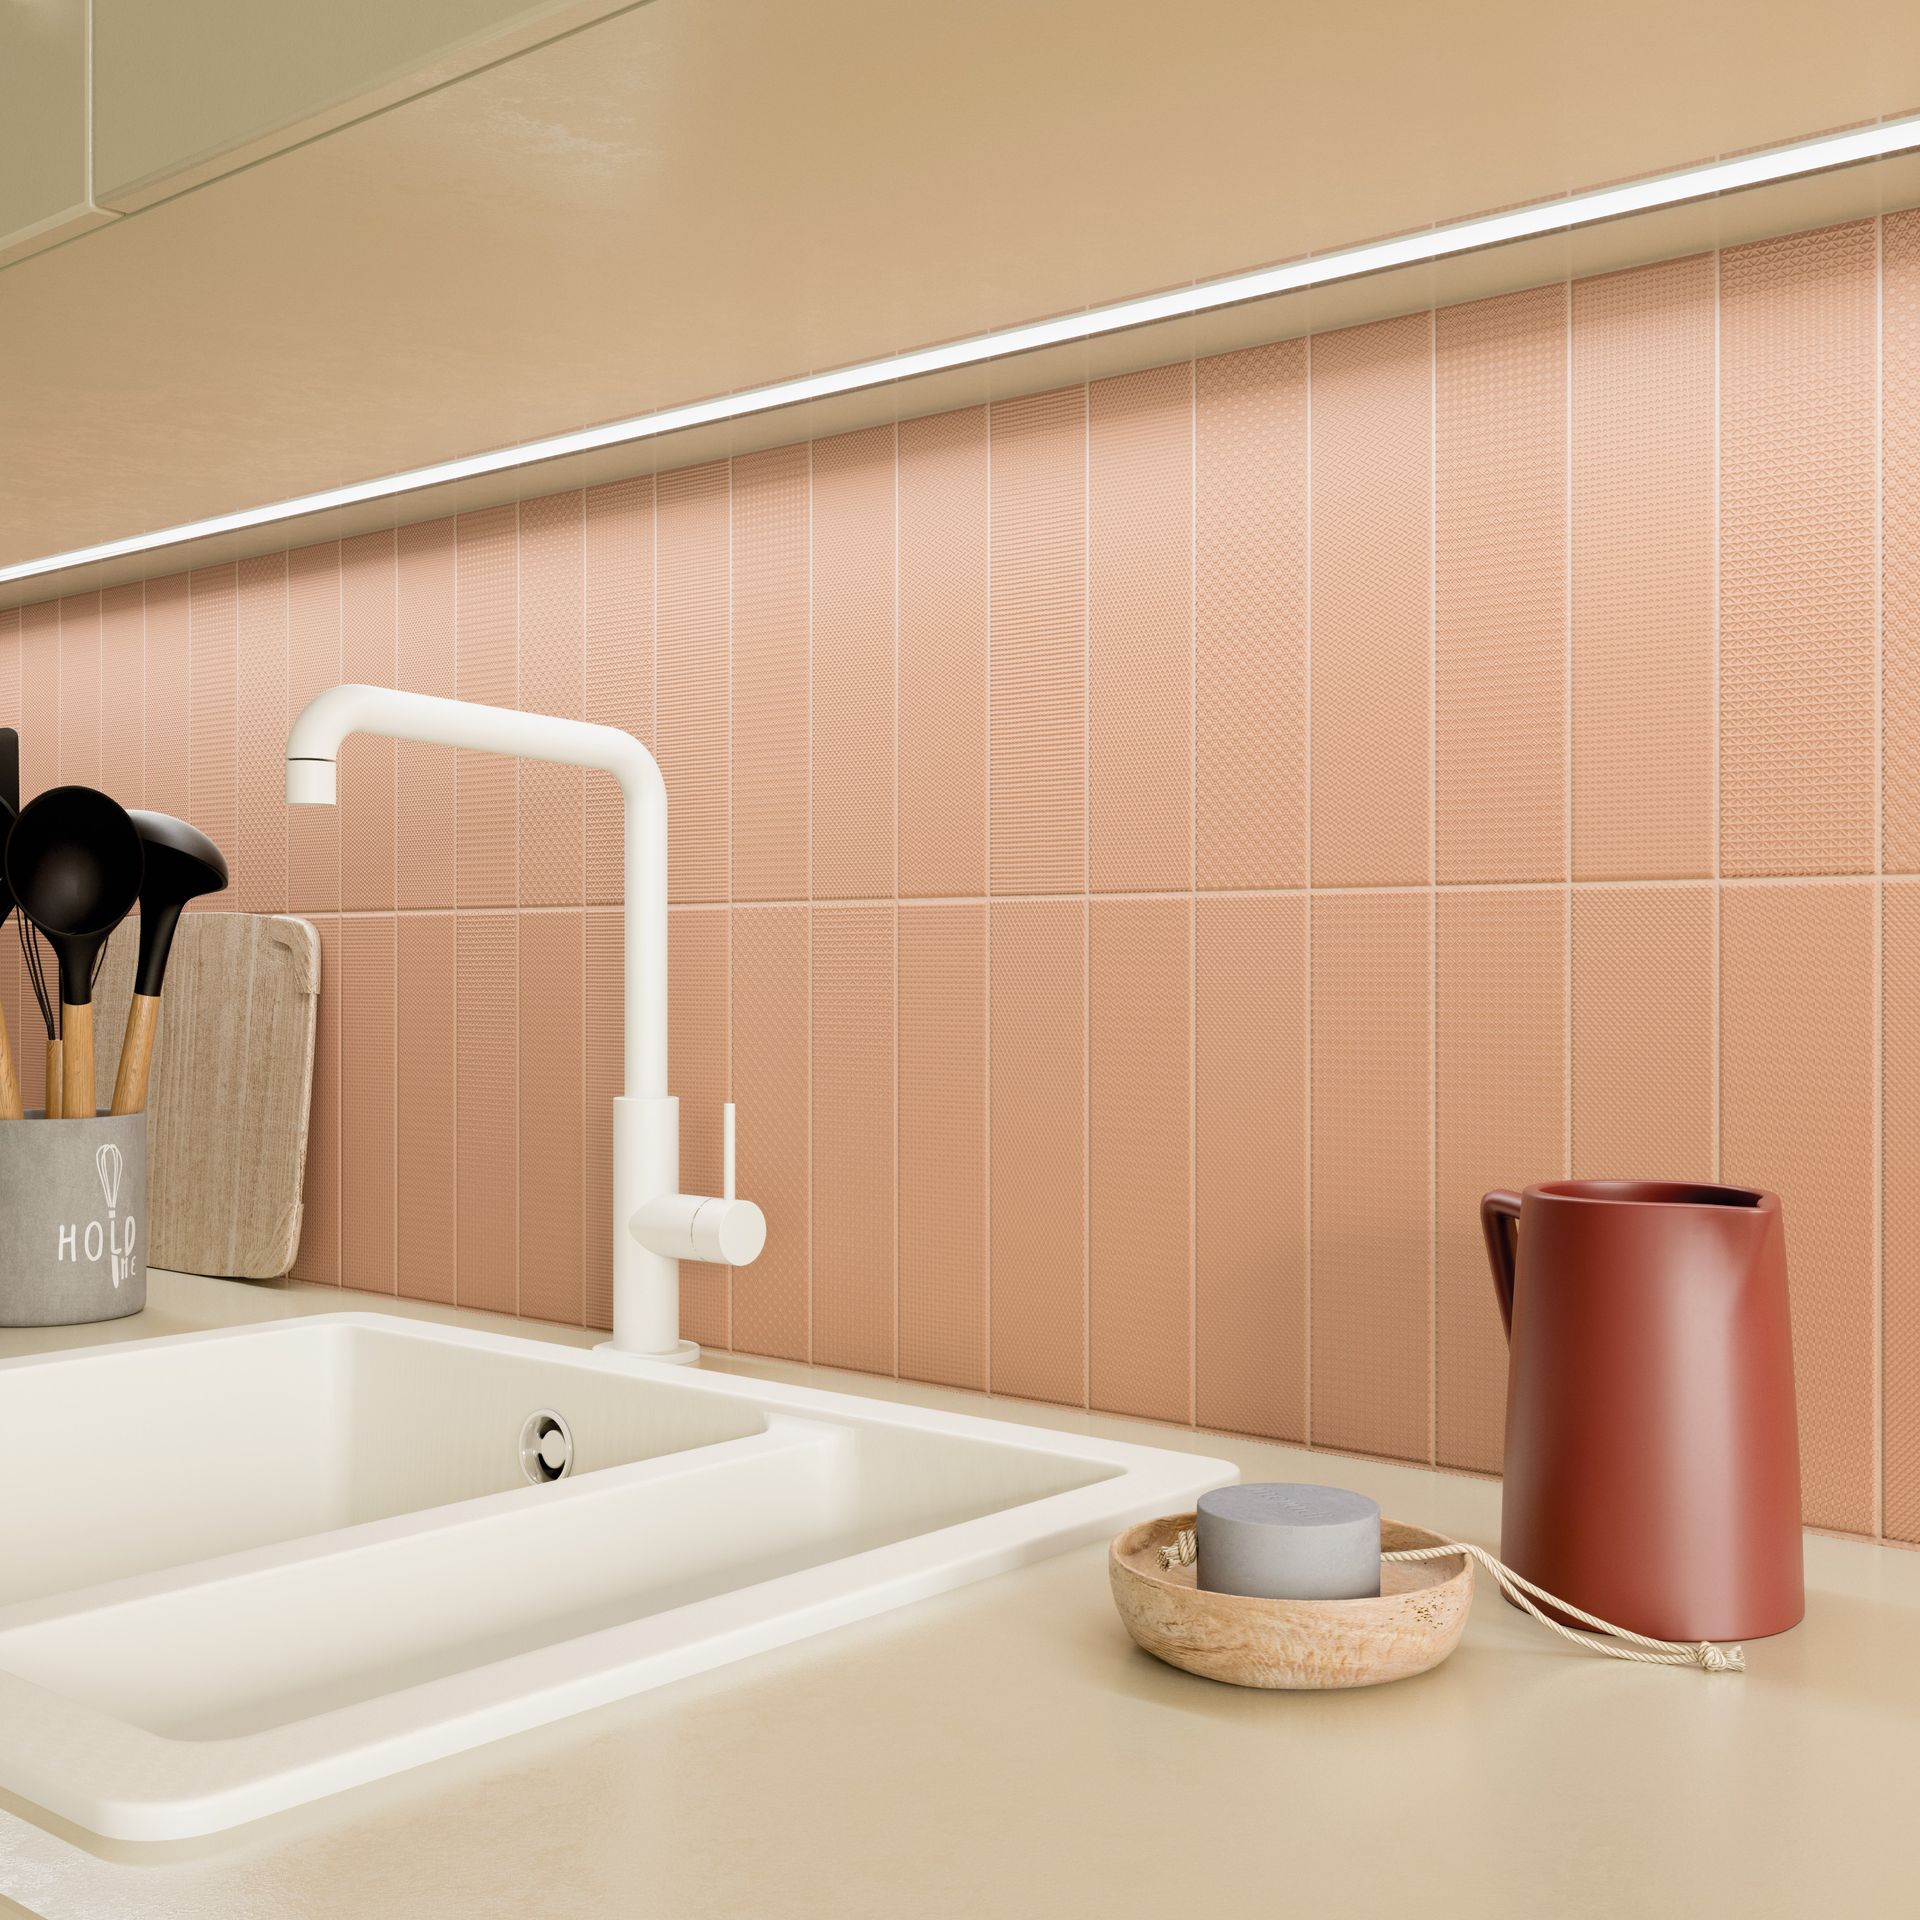 a peach coloured tile with a orange jug and a white brass ware sink